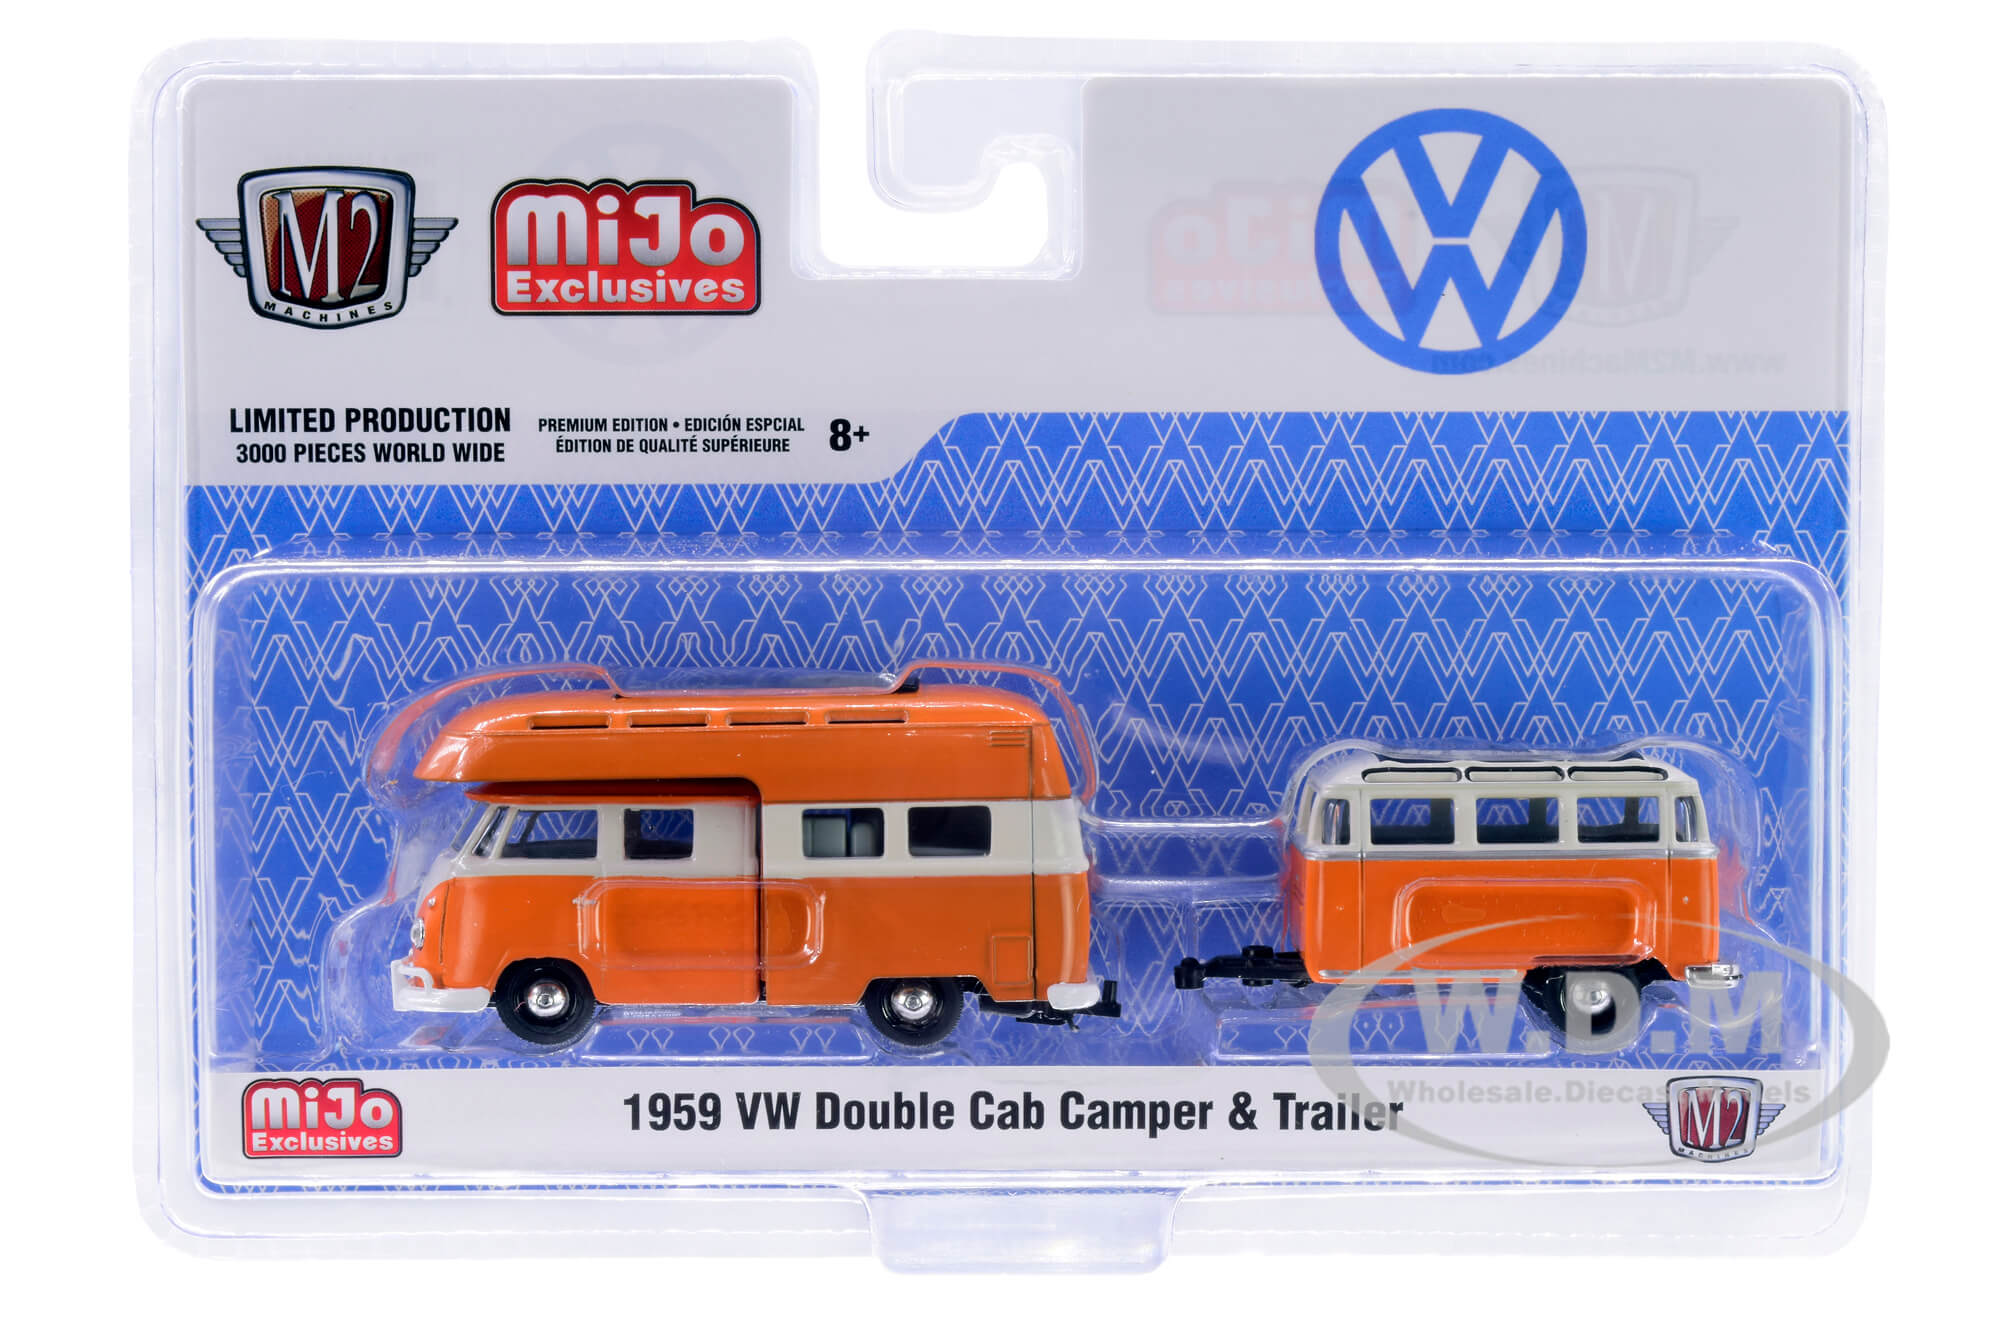 1959 Volkswagen Double Cab Camper With Travel Trailer Orange And Cream Limited Edition To 3000 Pieces Worldwide 1/64 Diecast Model Car By M2 Machines